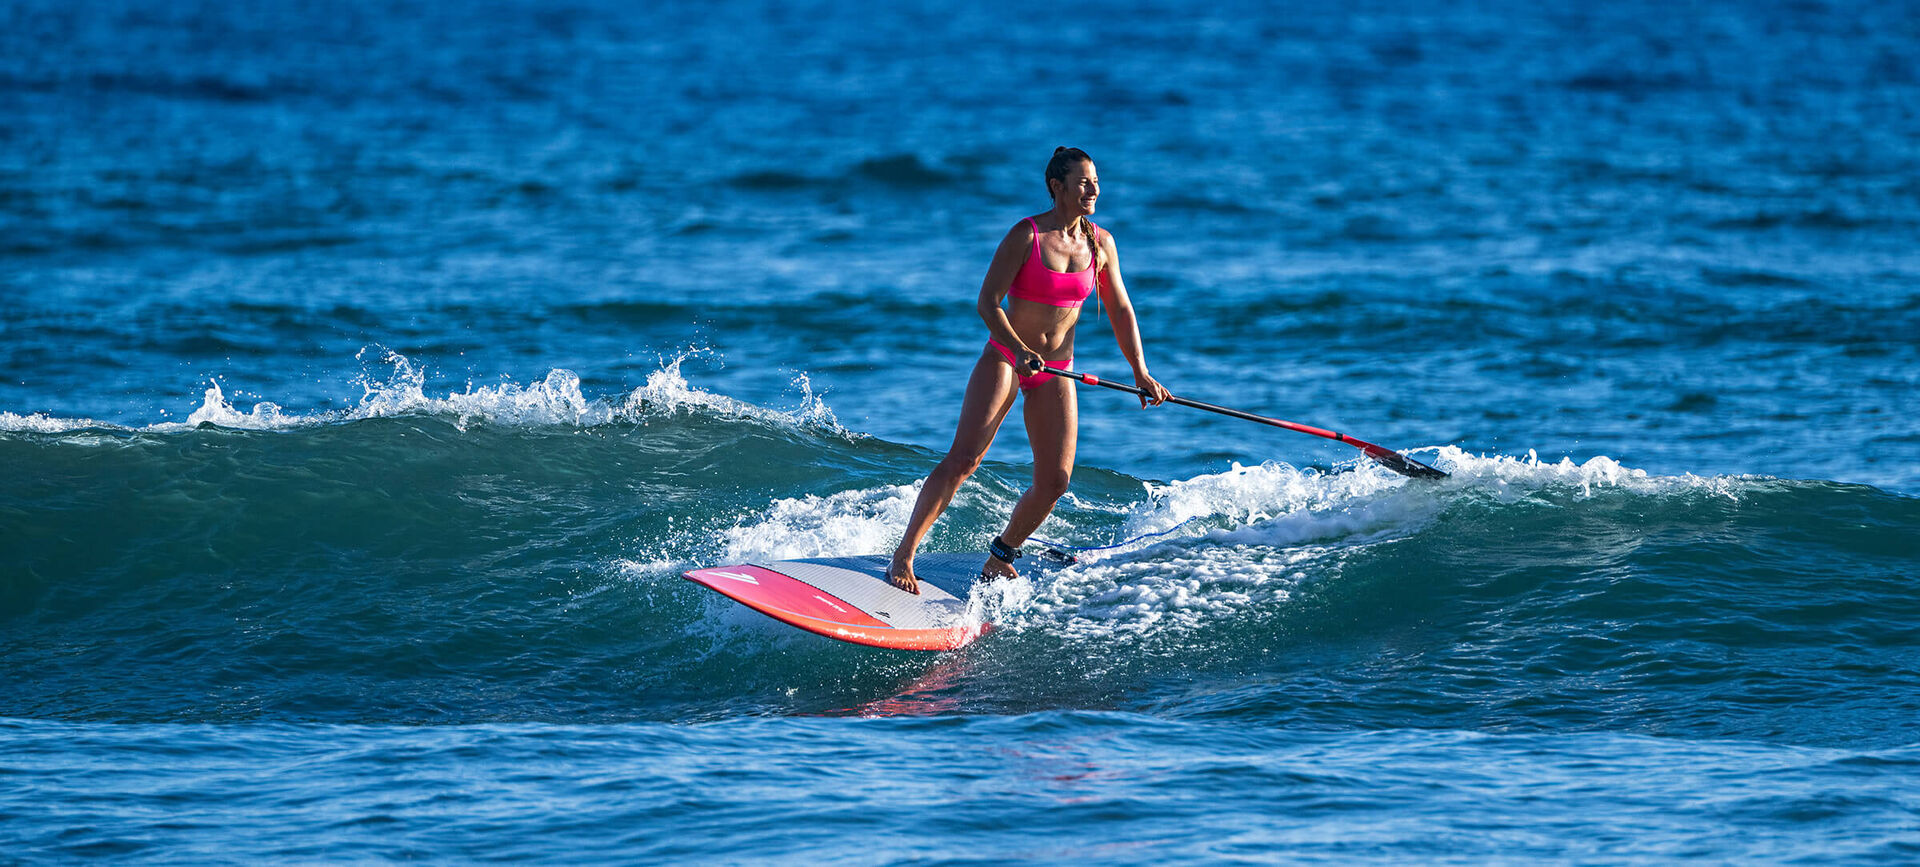 The 2023 Fanatic Allwave stand up paddle board is super easy to paddle and catch waves in all conditions .The ideal board for any intermediate or those who frequently surf less than perfect waves. 